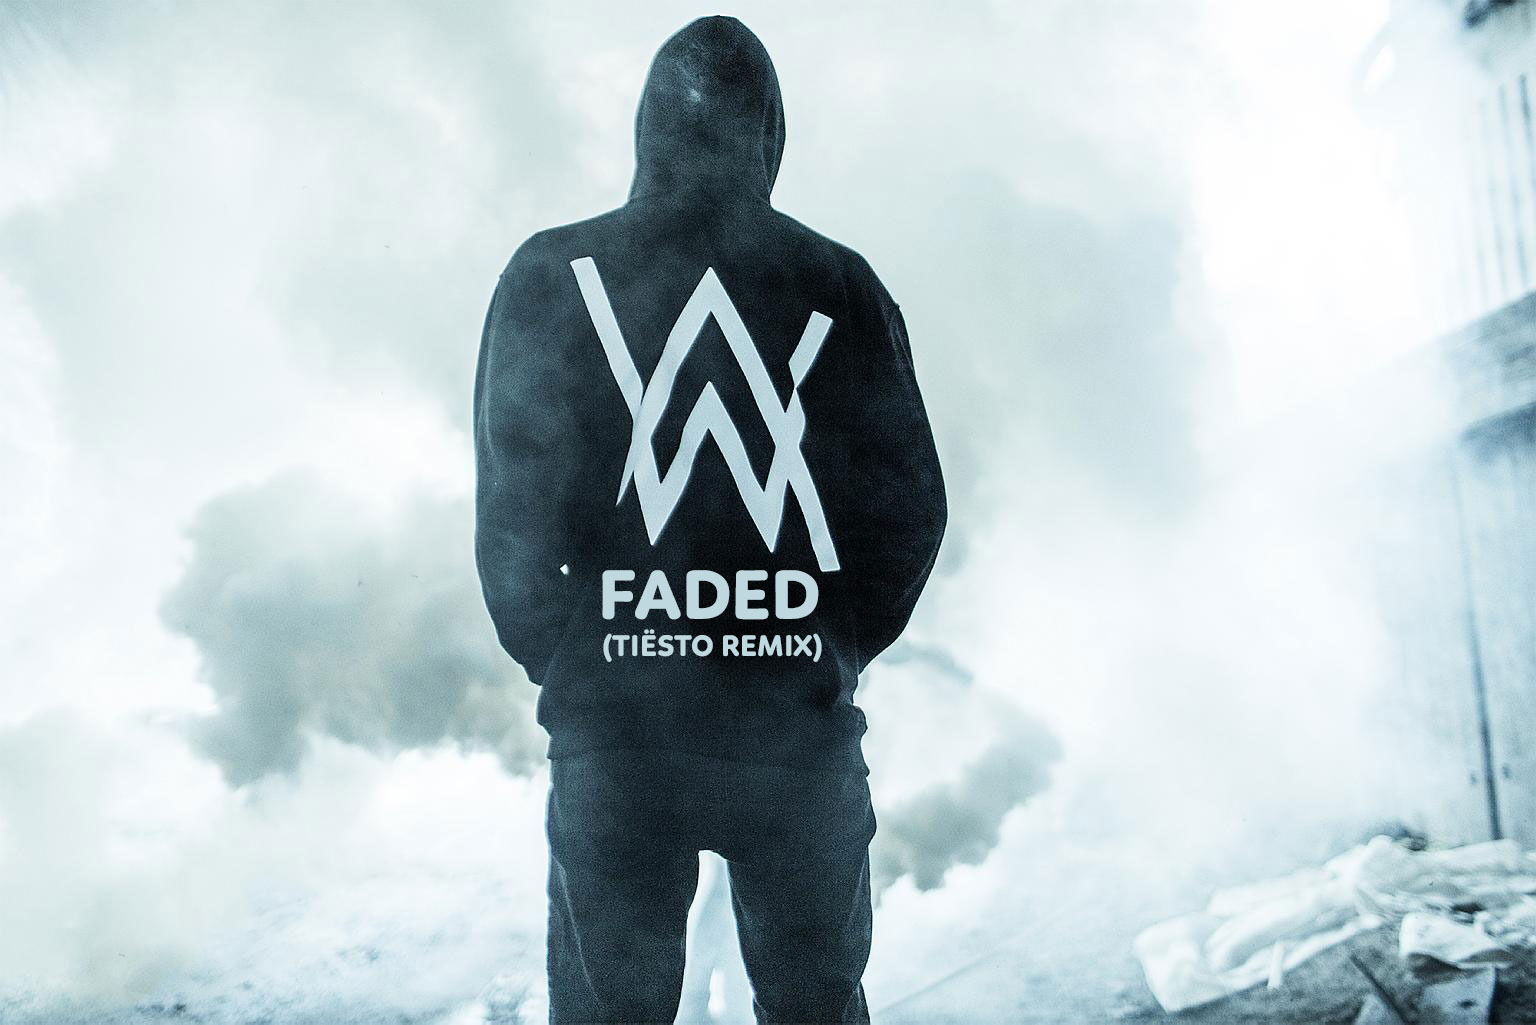 Great White Dj Alan Walker S Faded Gets The Royal Remix Treatment